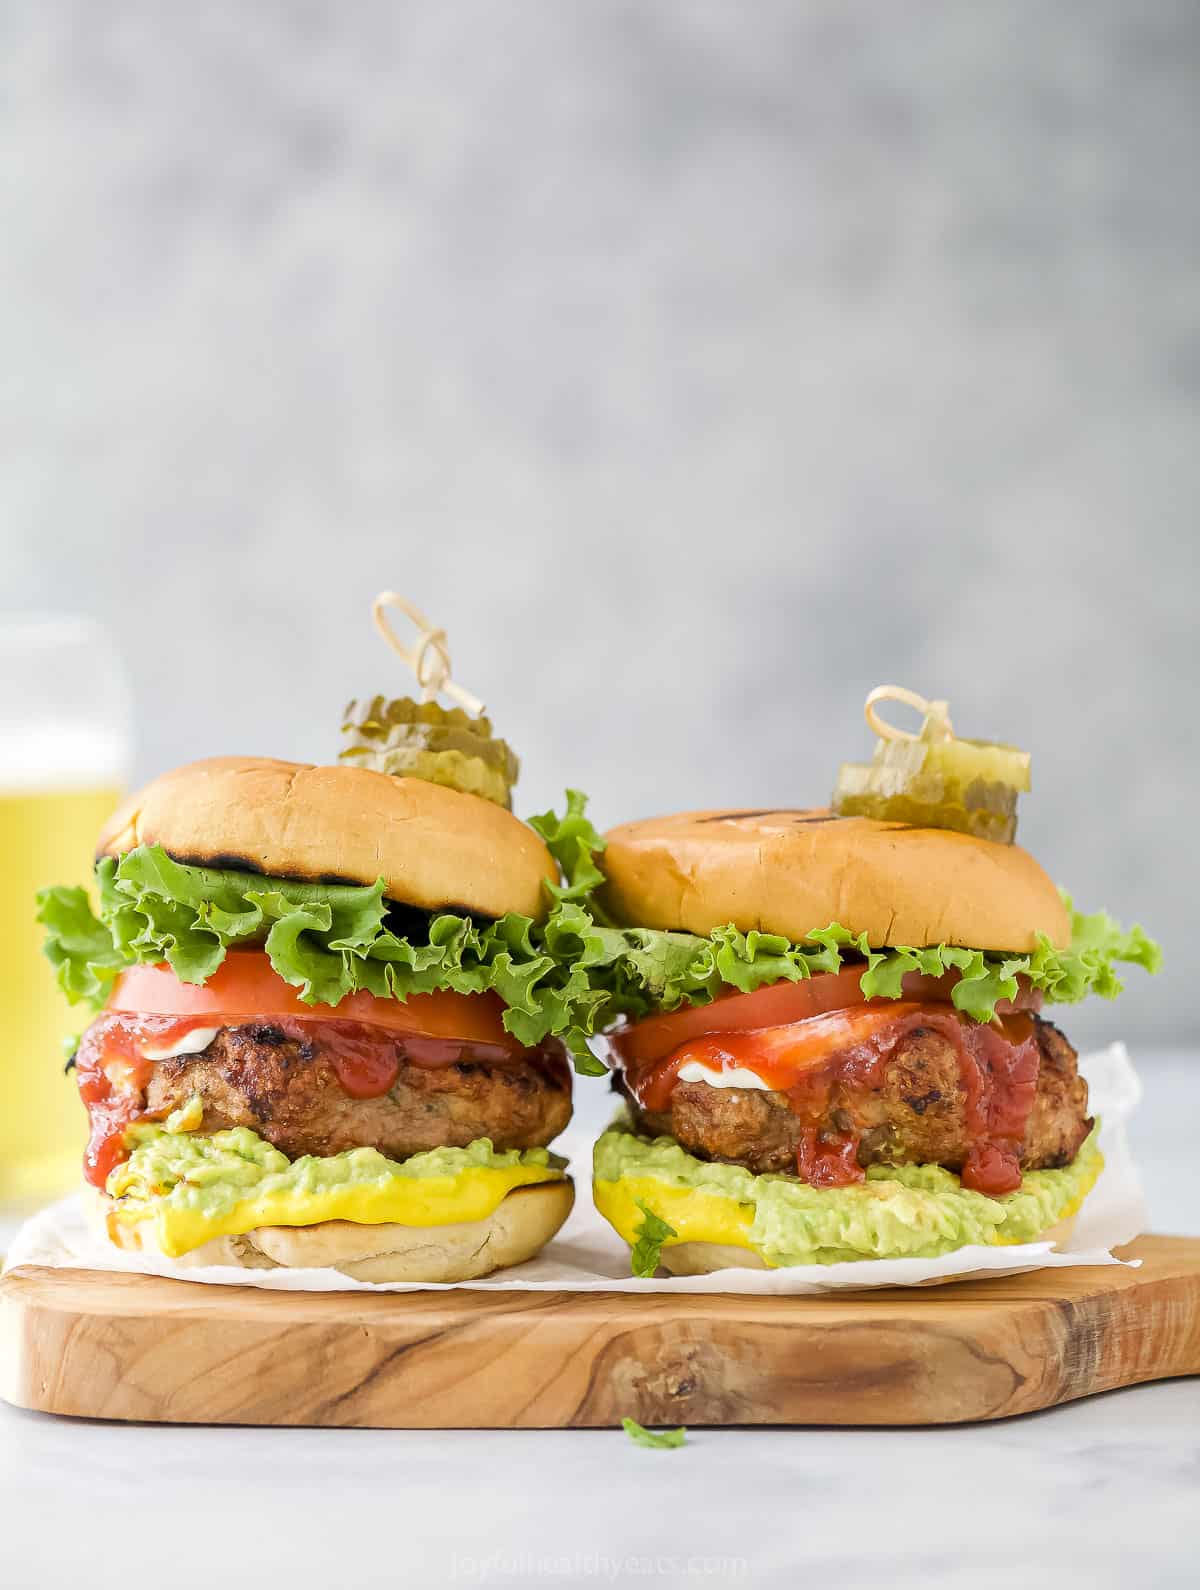 Two turkey burgers with homemade patties sitting side-by-side on a cutting board